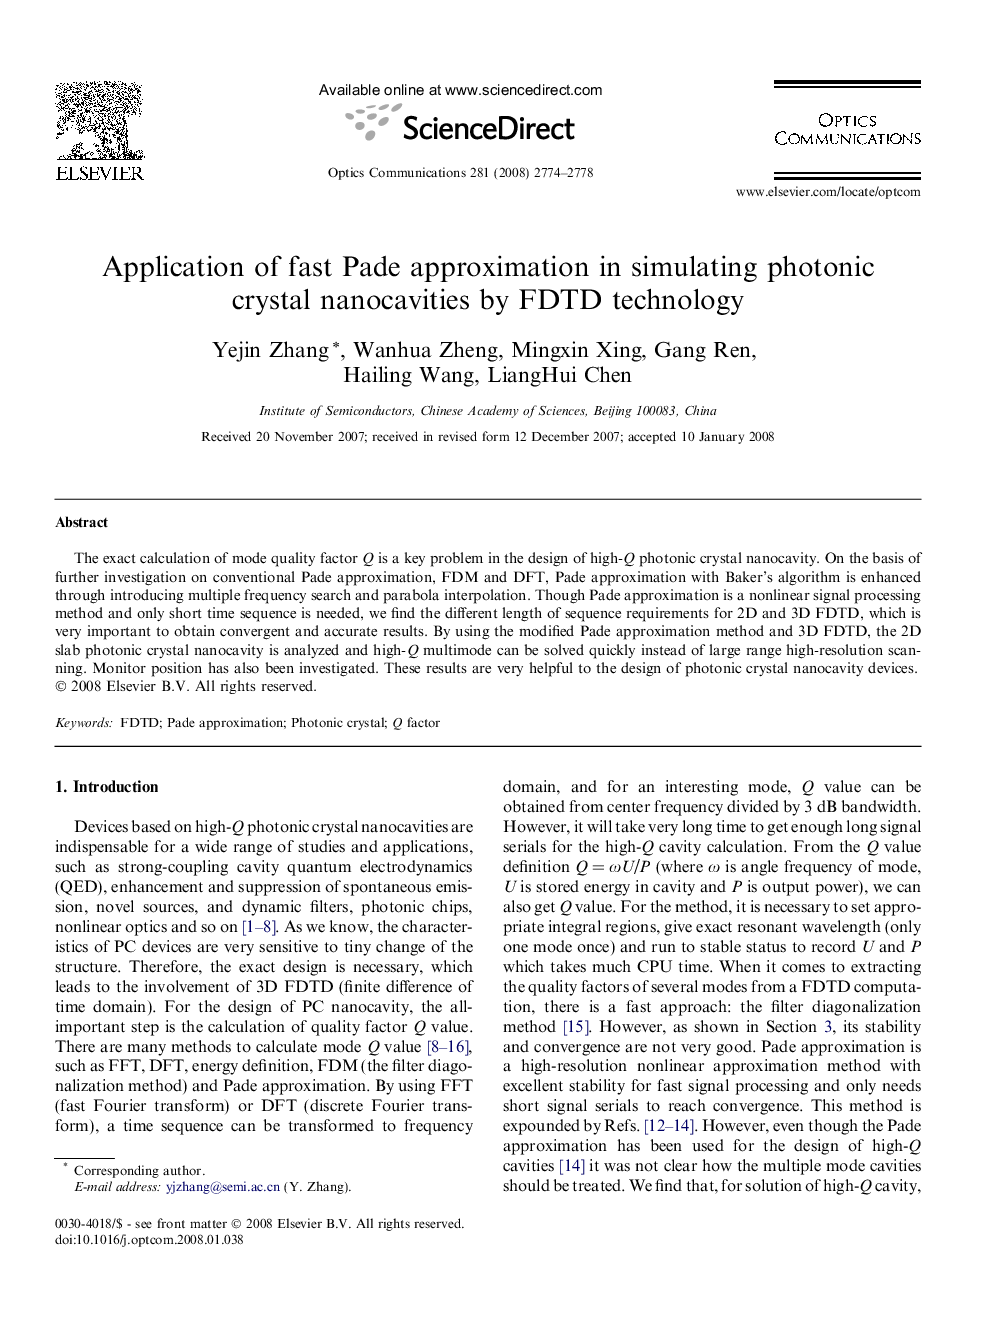 Application of fast Pade approximation in simulating photonic crystal nanocavities by FDTD technology